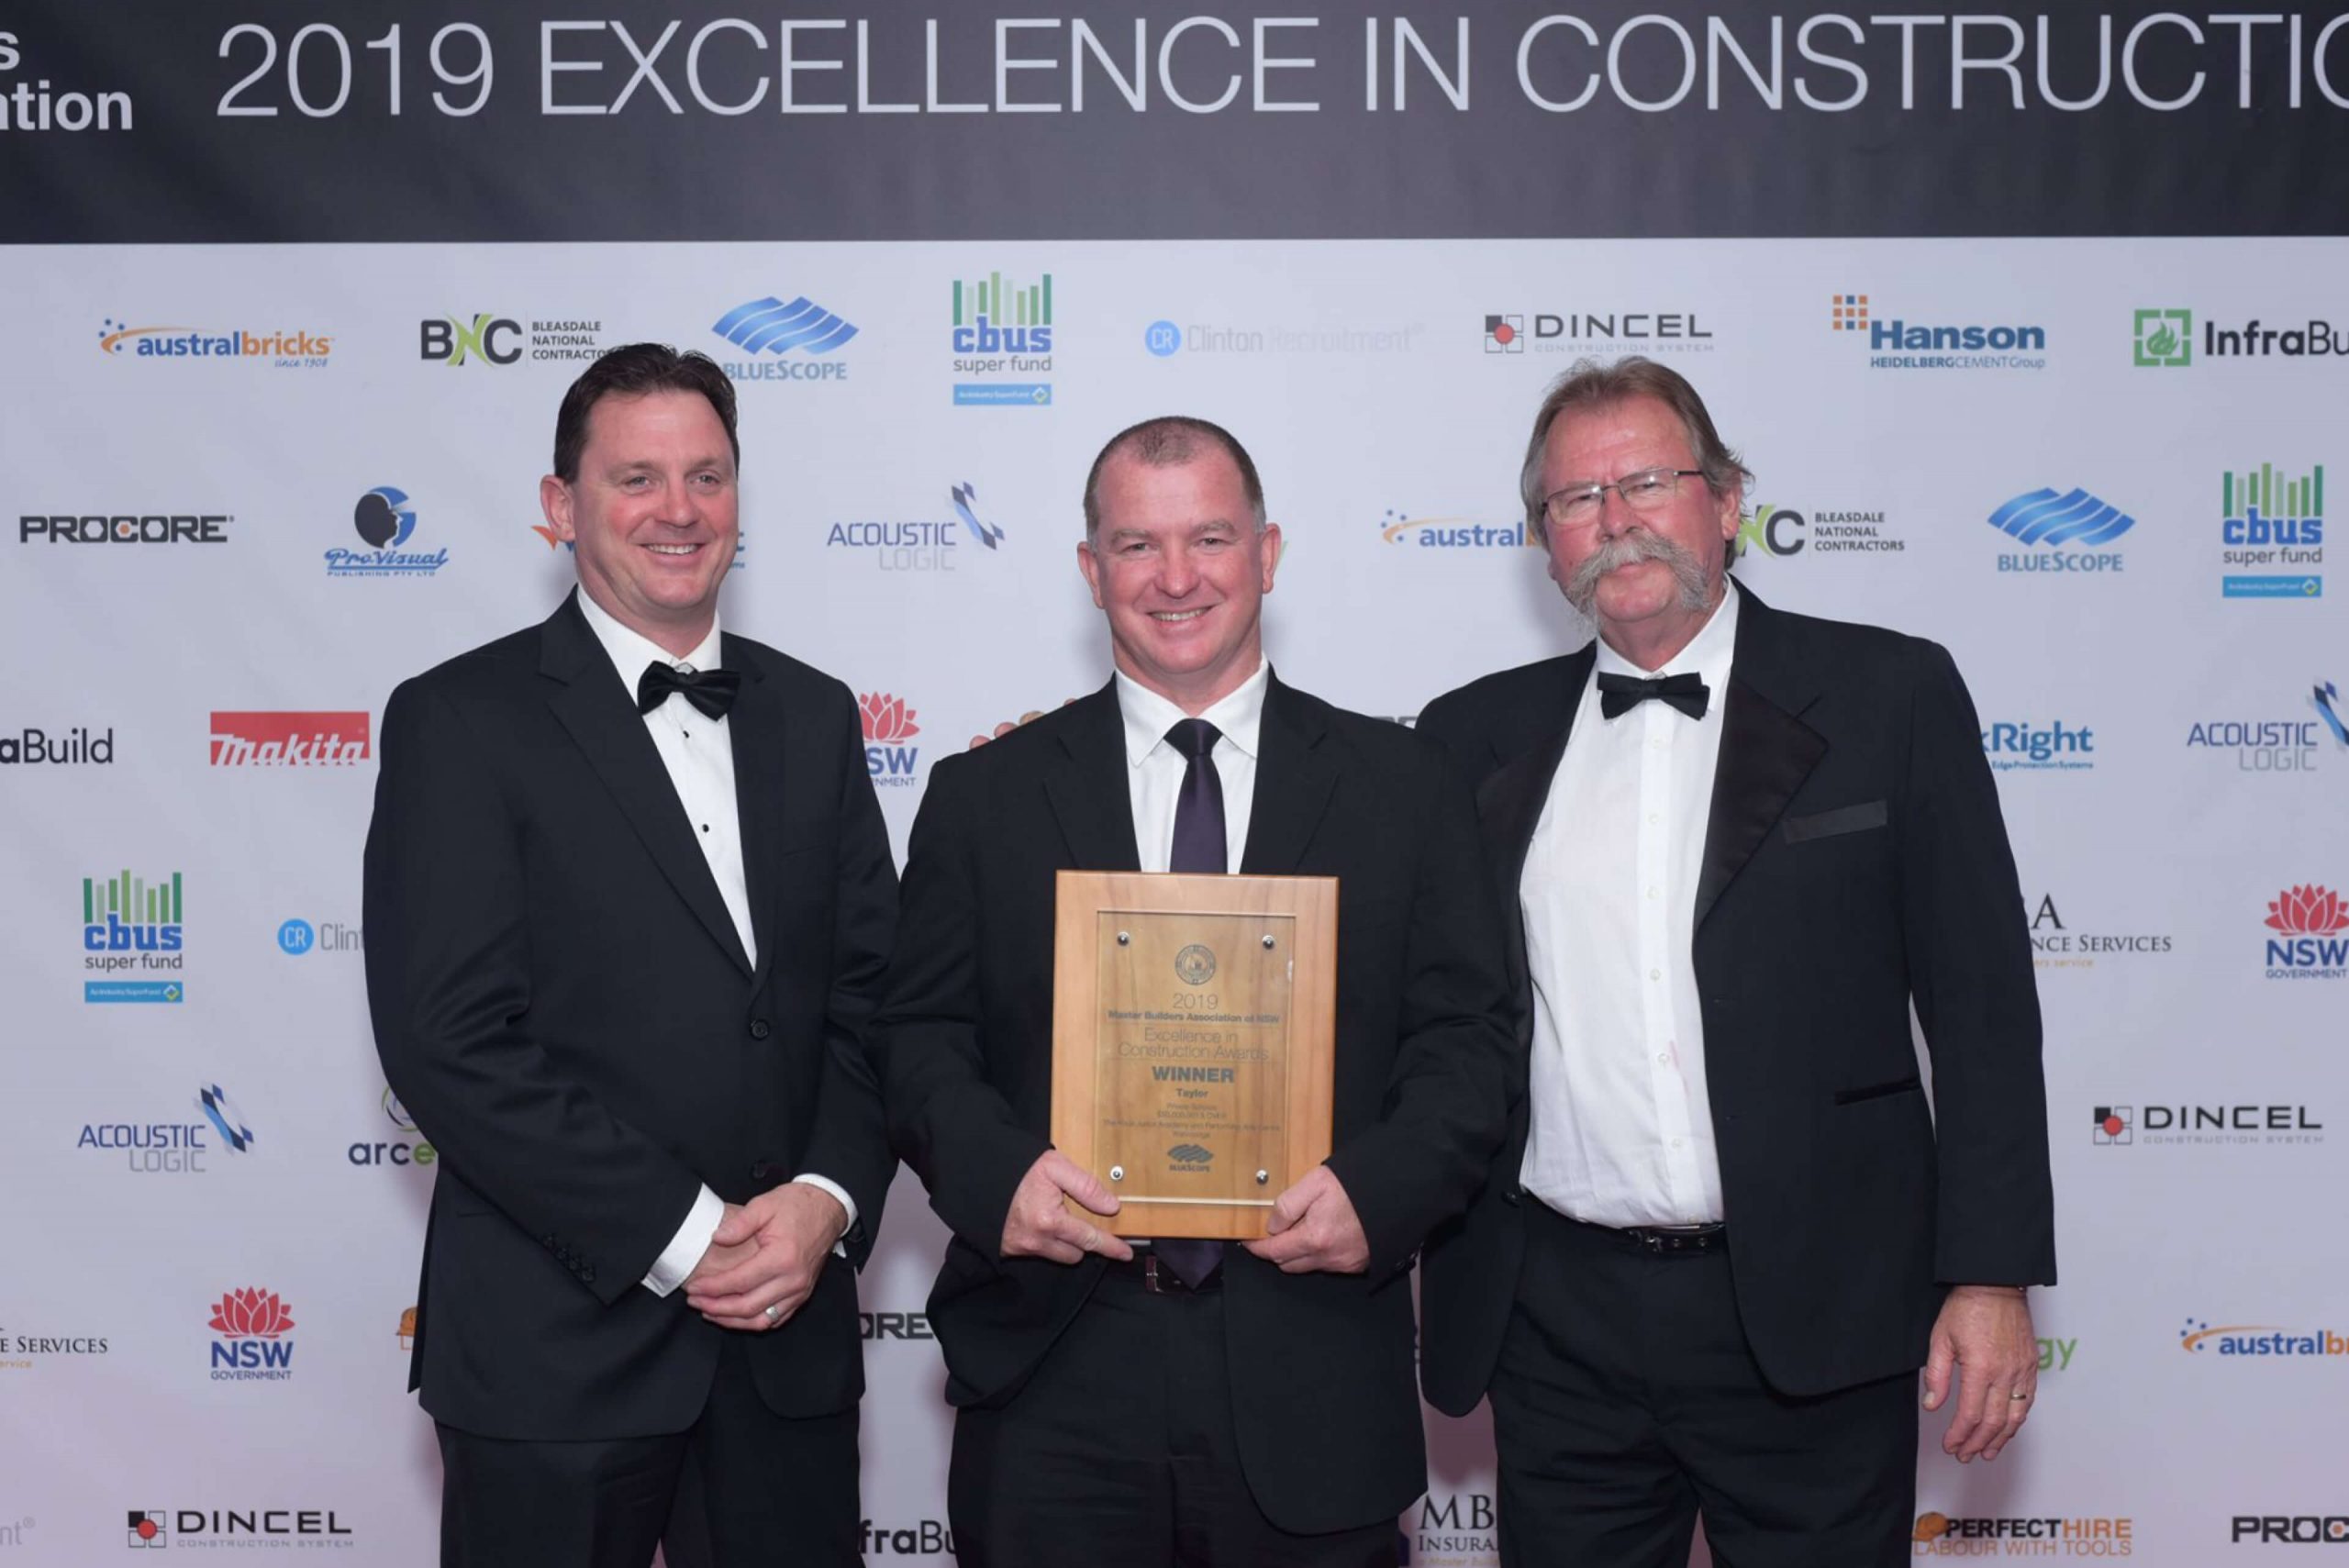 008 peter barnes excellence in construction awards